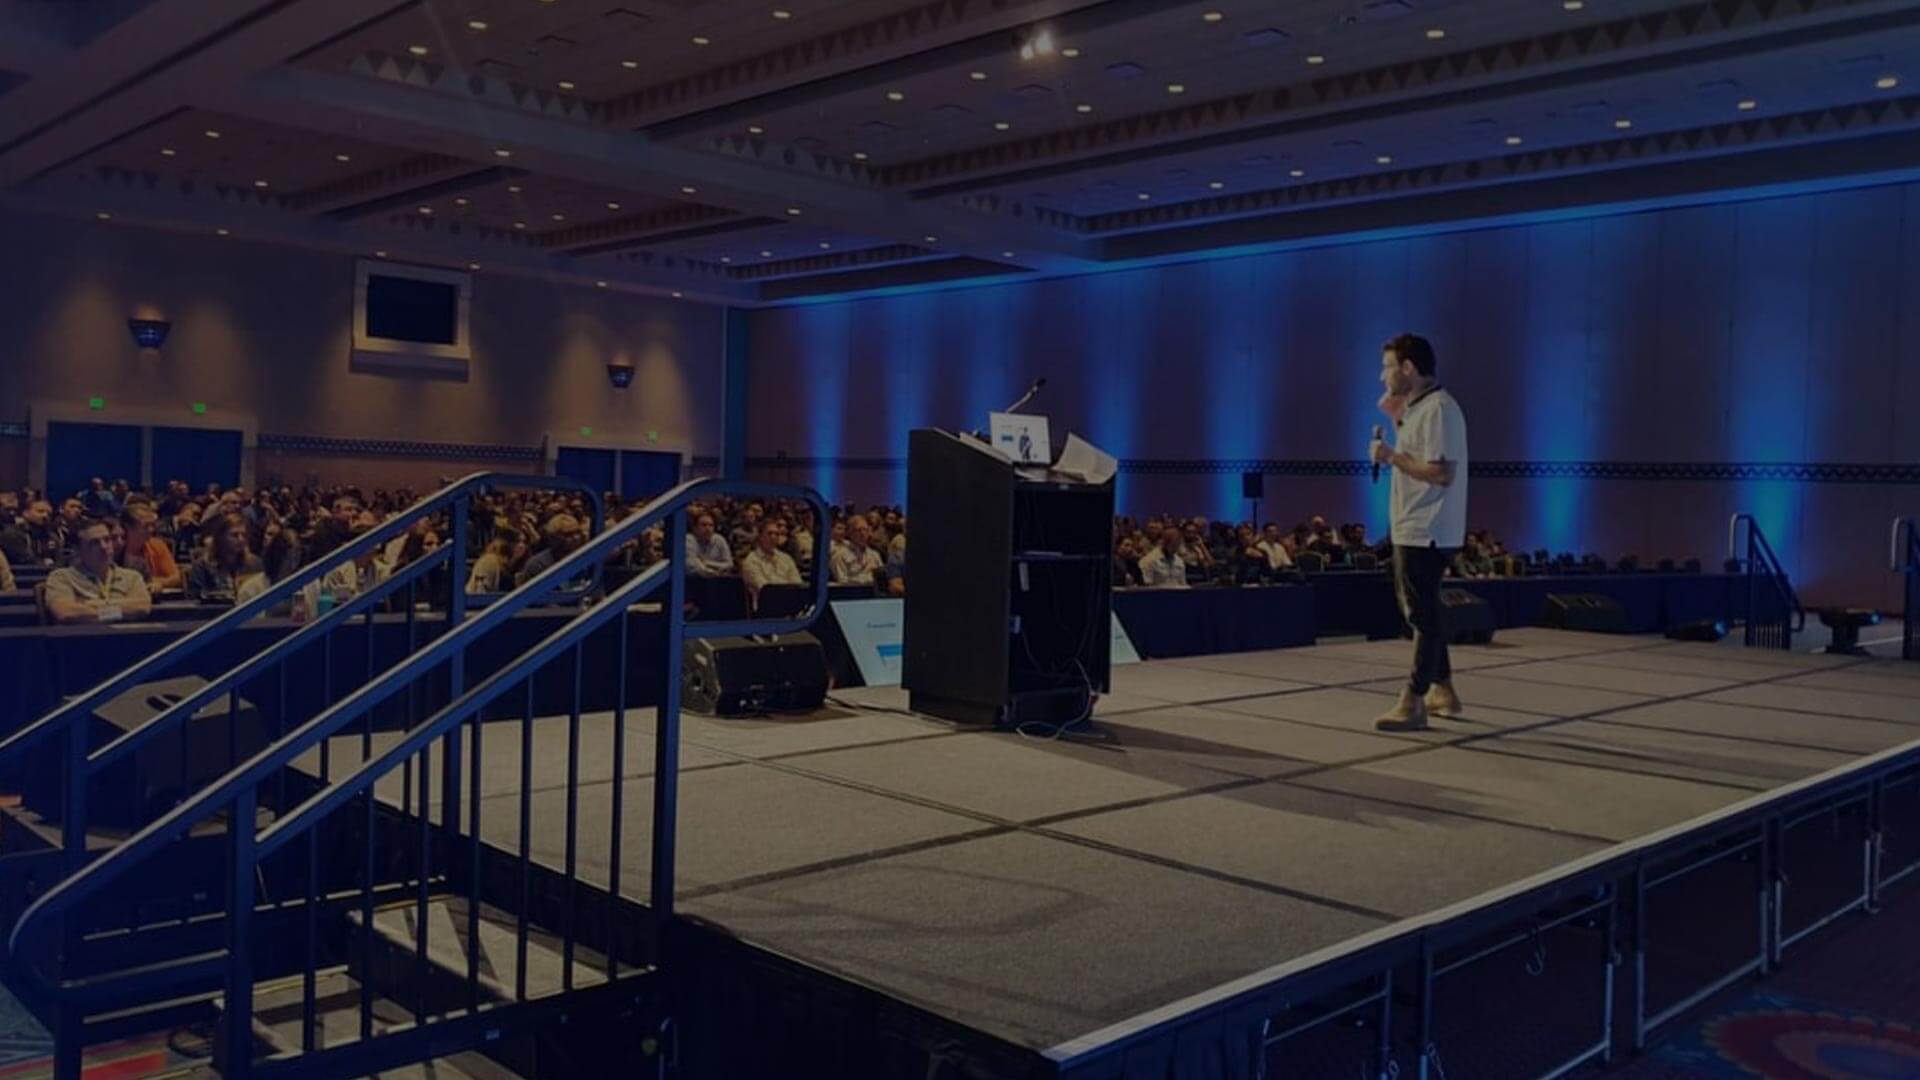 accessiBe Founders blindfold and lecture to 600 Employees of Digital Ocean at Florida